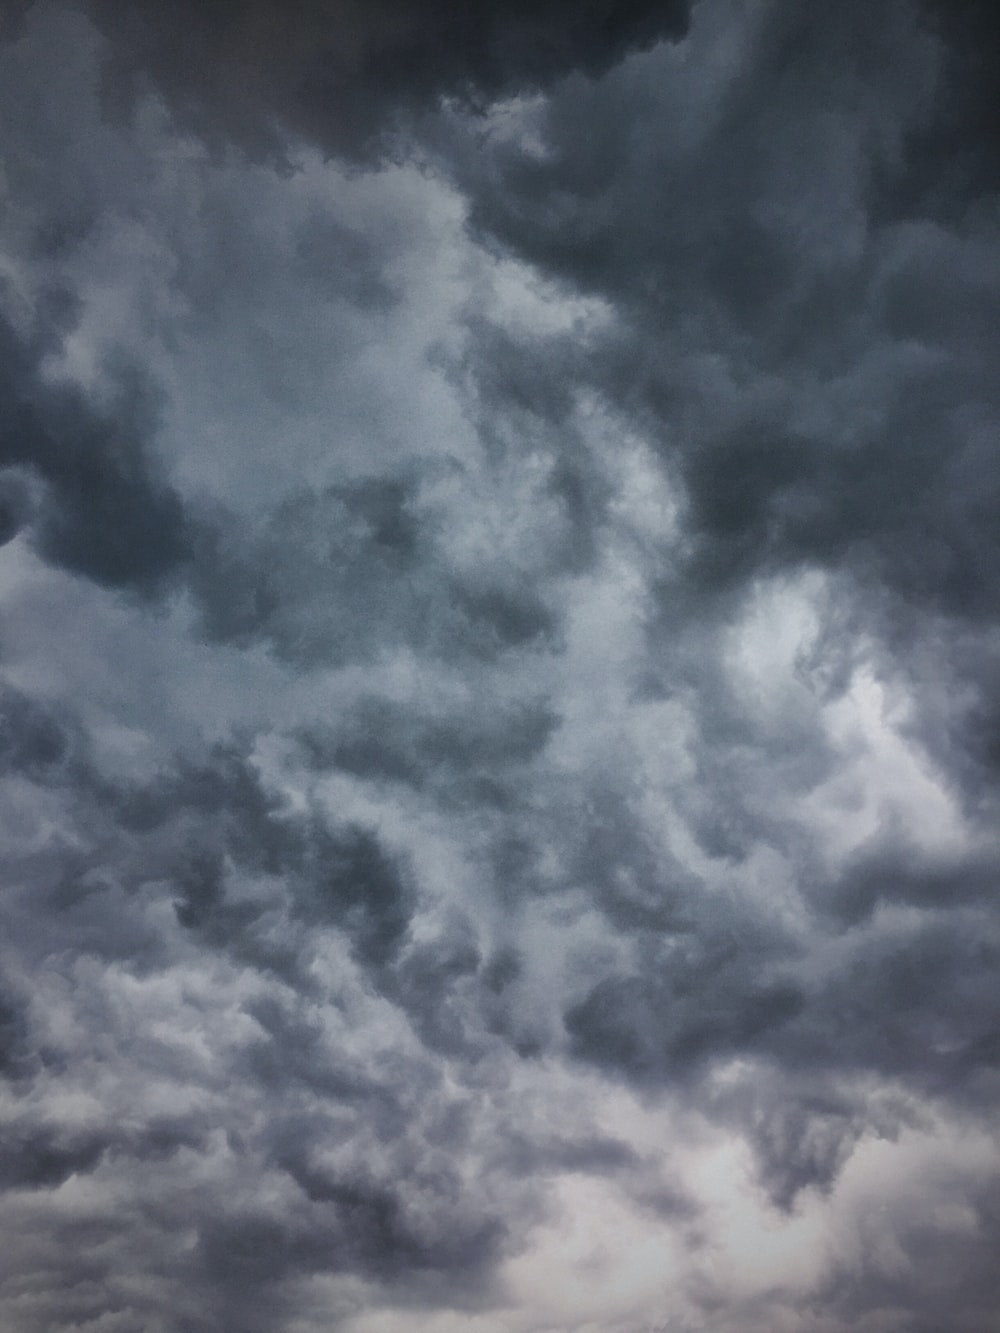 Stunning Cloudy Sky Picture. Download Free Image